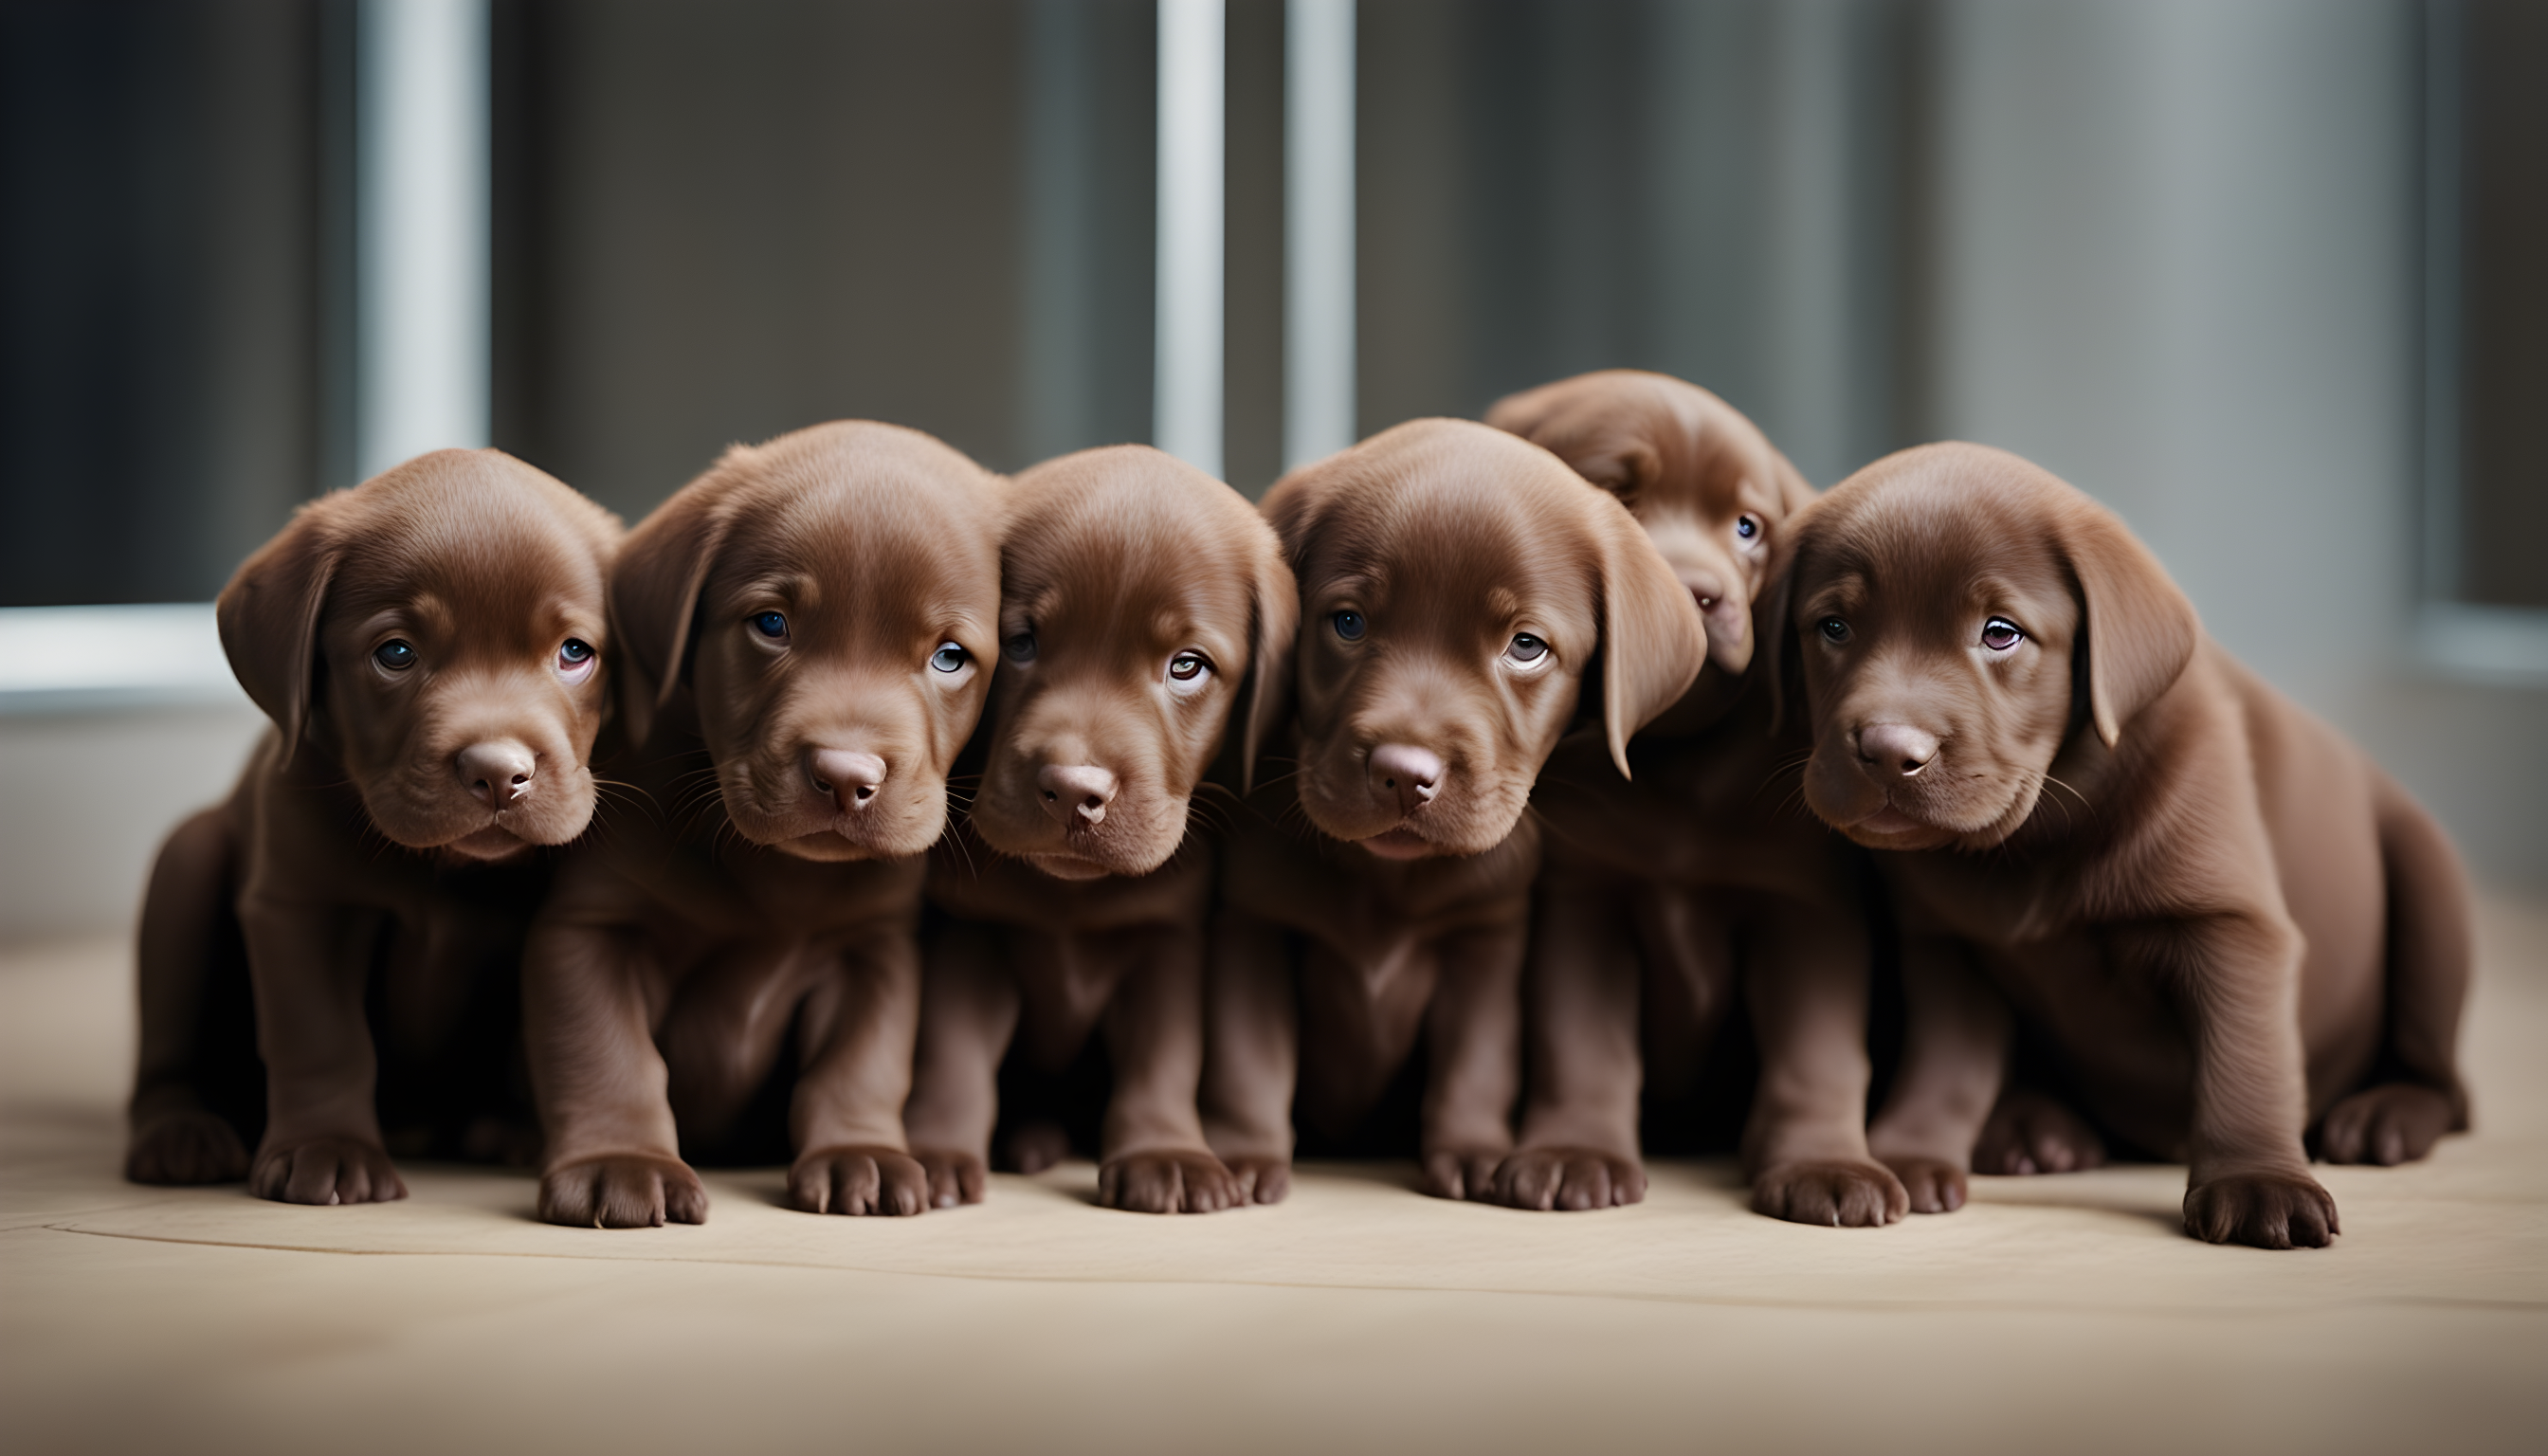 A litter of chocolate lab puppies happily playing in a clean, spacious environment, showcasing ethical breeding practices